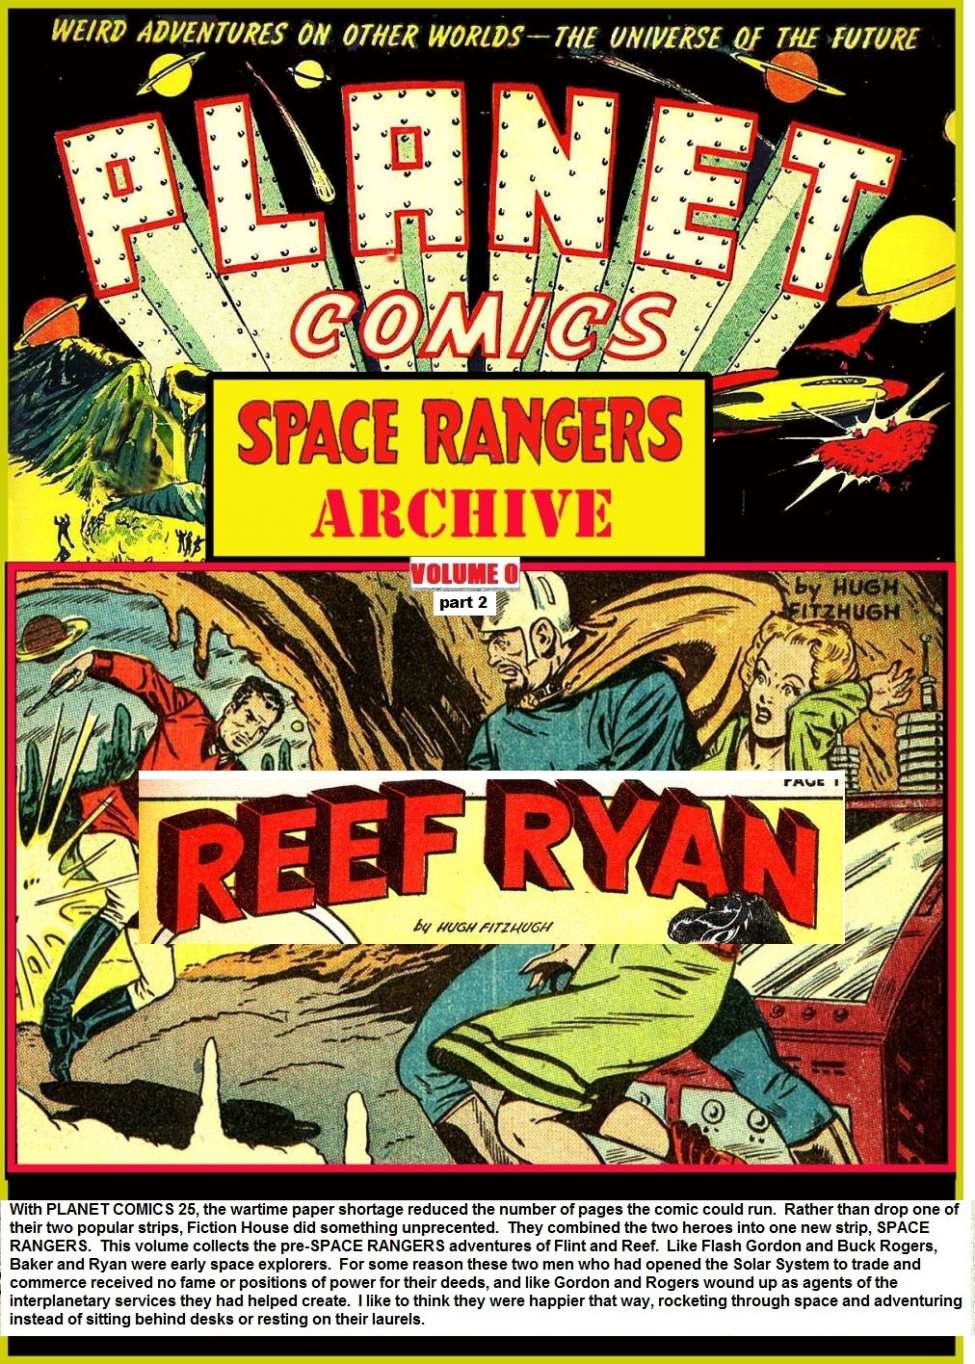 Book Cover For Space Rangers Archive 3